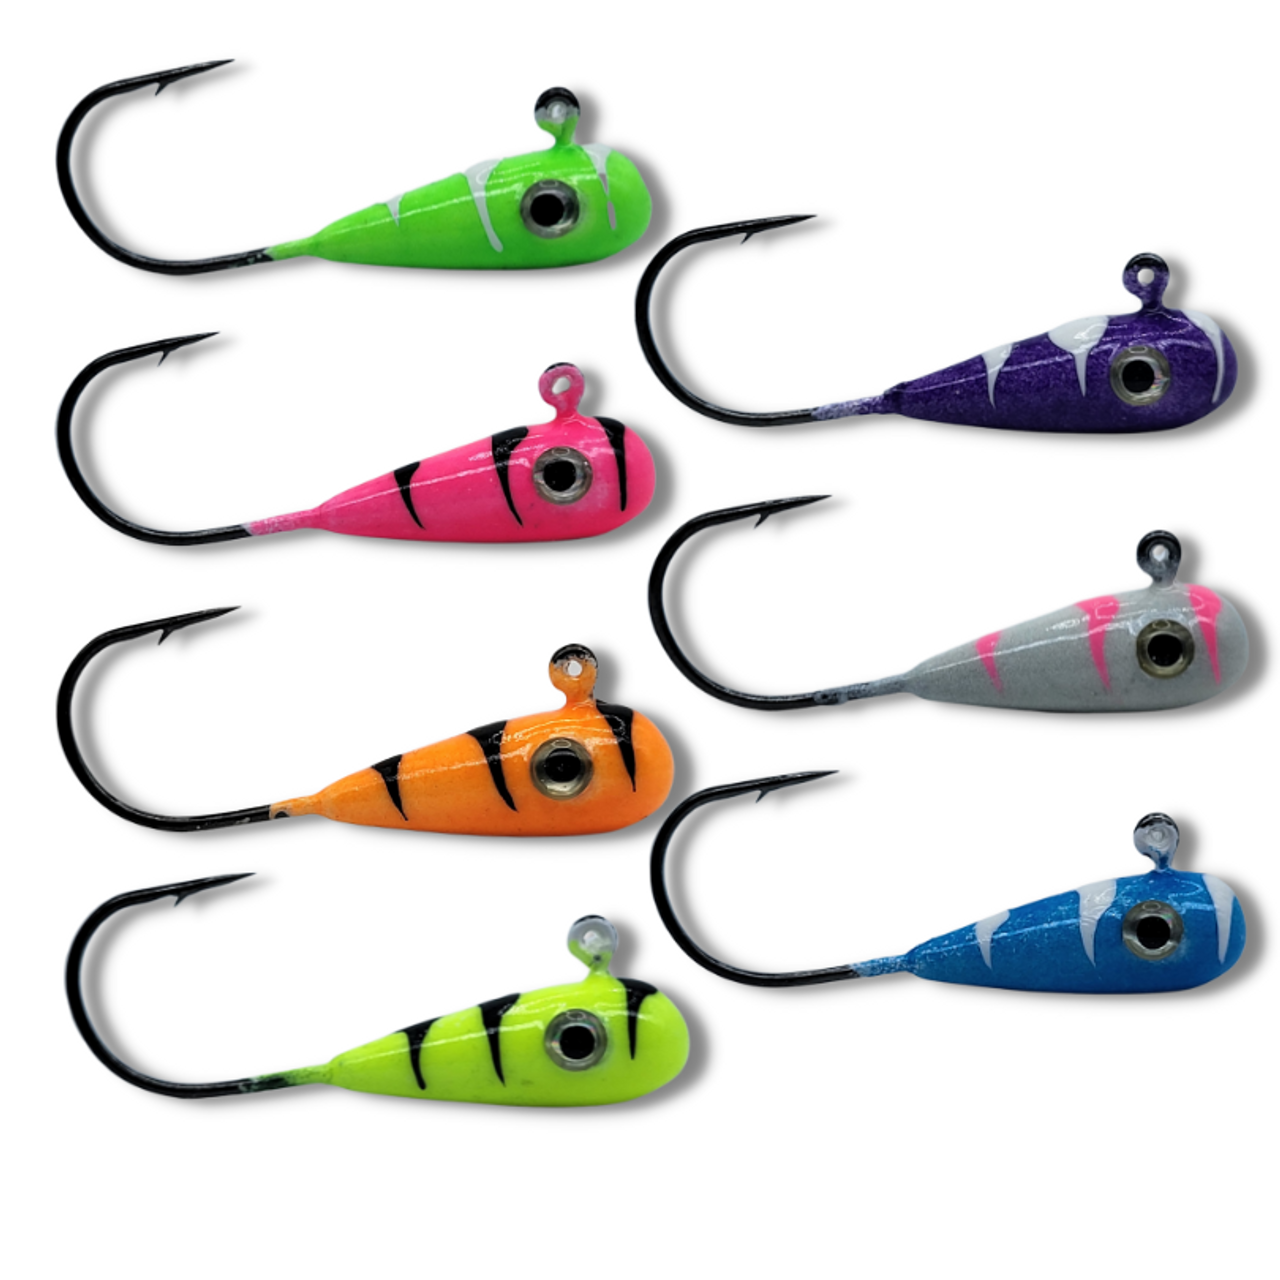 kaleidoscope Jigs are for all fish species. Our unique glow finish really produces the slabs! For the brightest kryptonite glow, charge with our Black UV  Flashlight. This ultra-violet flashlight is nearly invisible to the human eye, but does a real number on the Kryptonite Glow! Use All Kryptonite Jigs at night and in stained water situations. Trust you can trust, you’ll be impressed! Tip with leeches, minnows or Plastics.